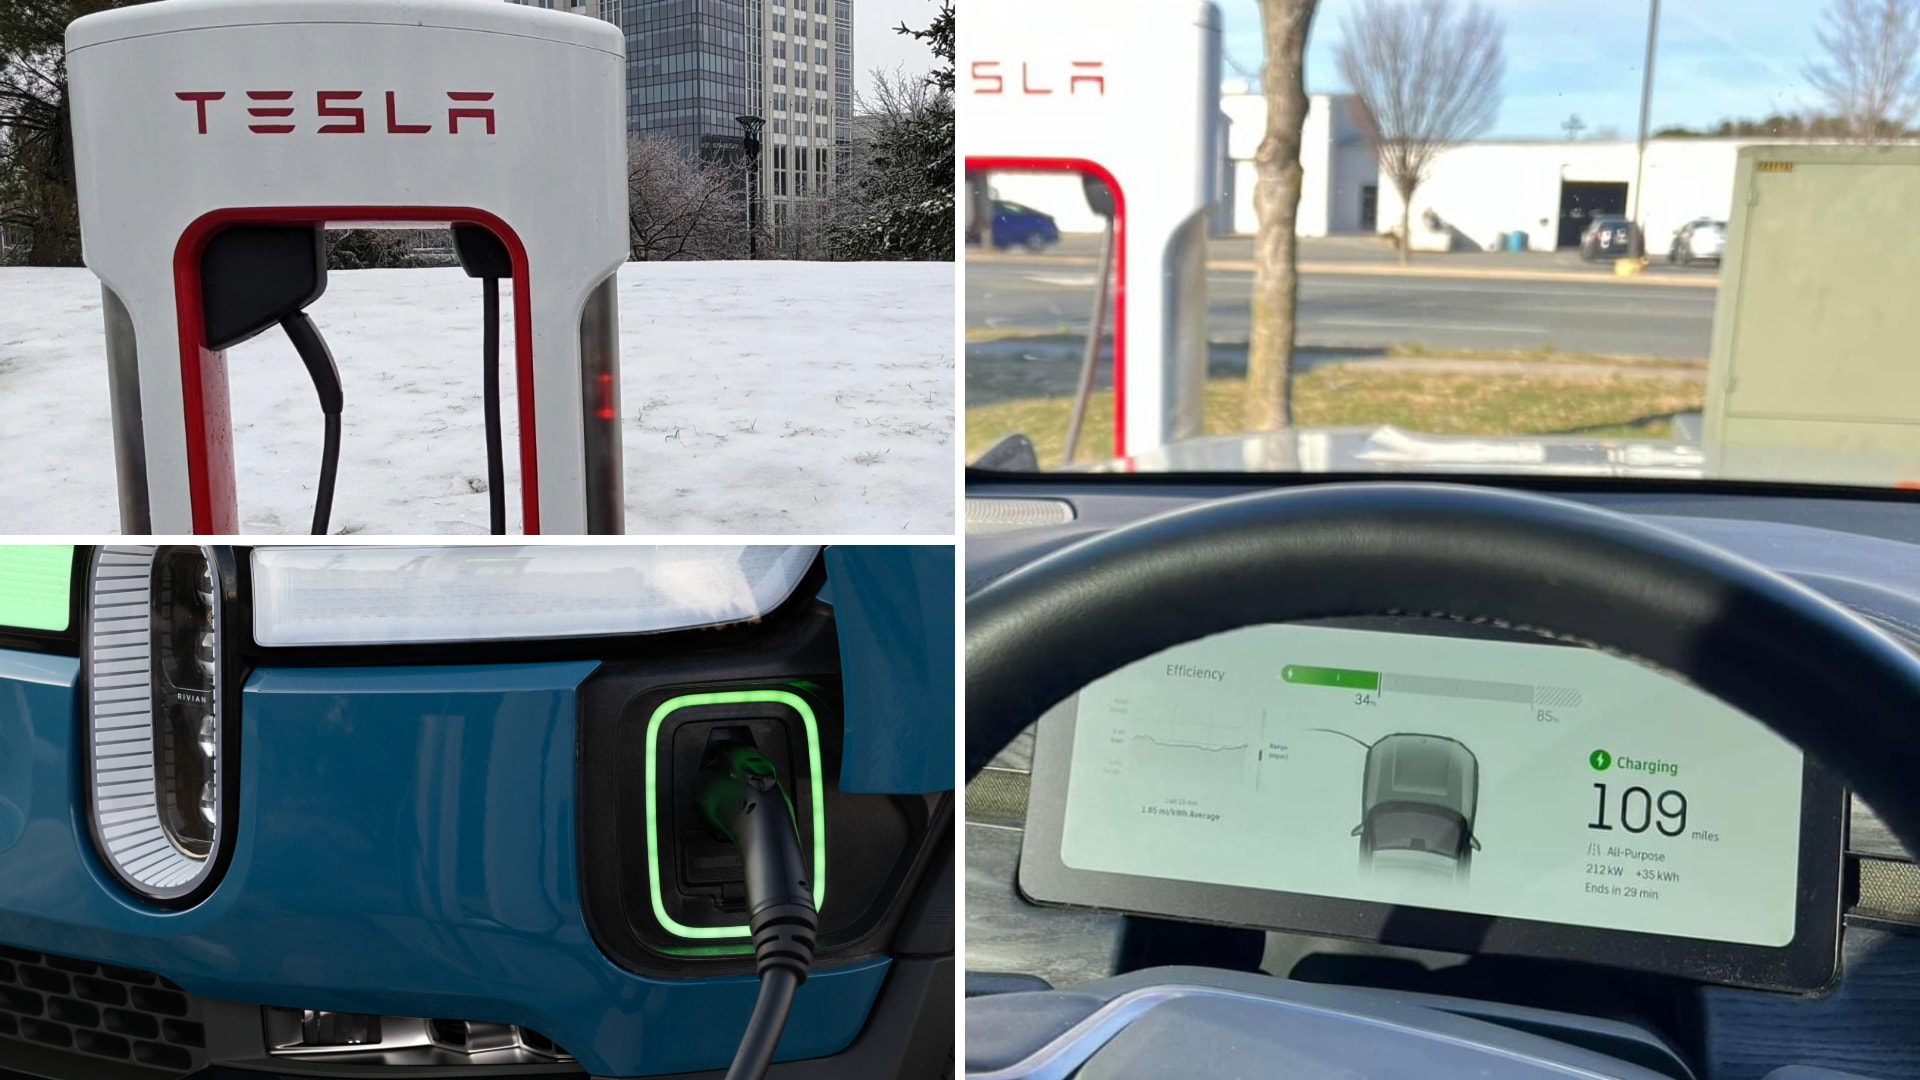 Magic Dock Engineering Genius In Action - Rivian and Ford Charge at Tesla  Supercharger